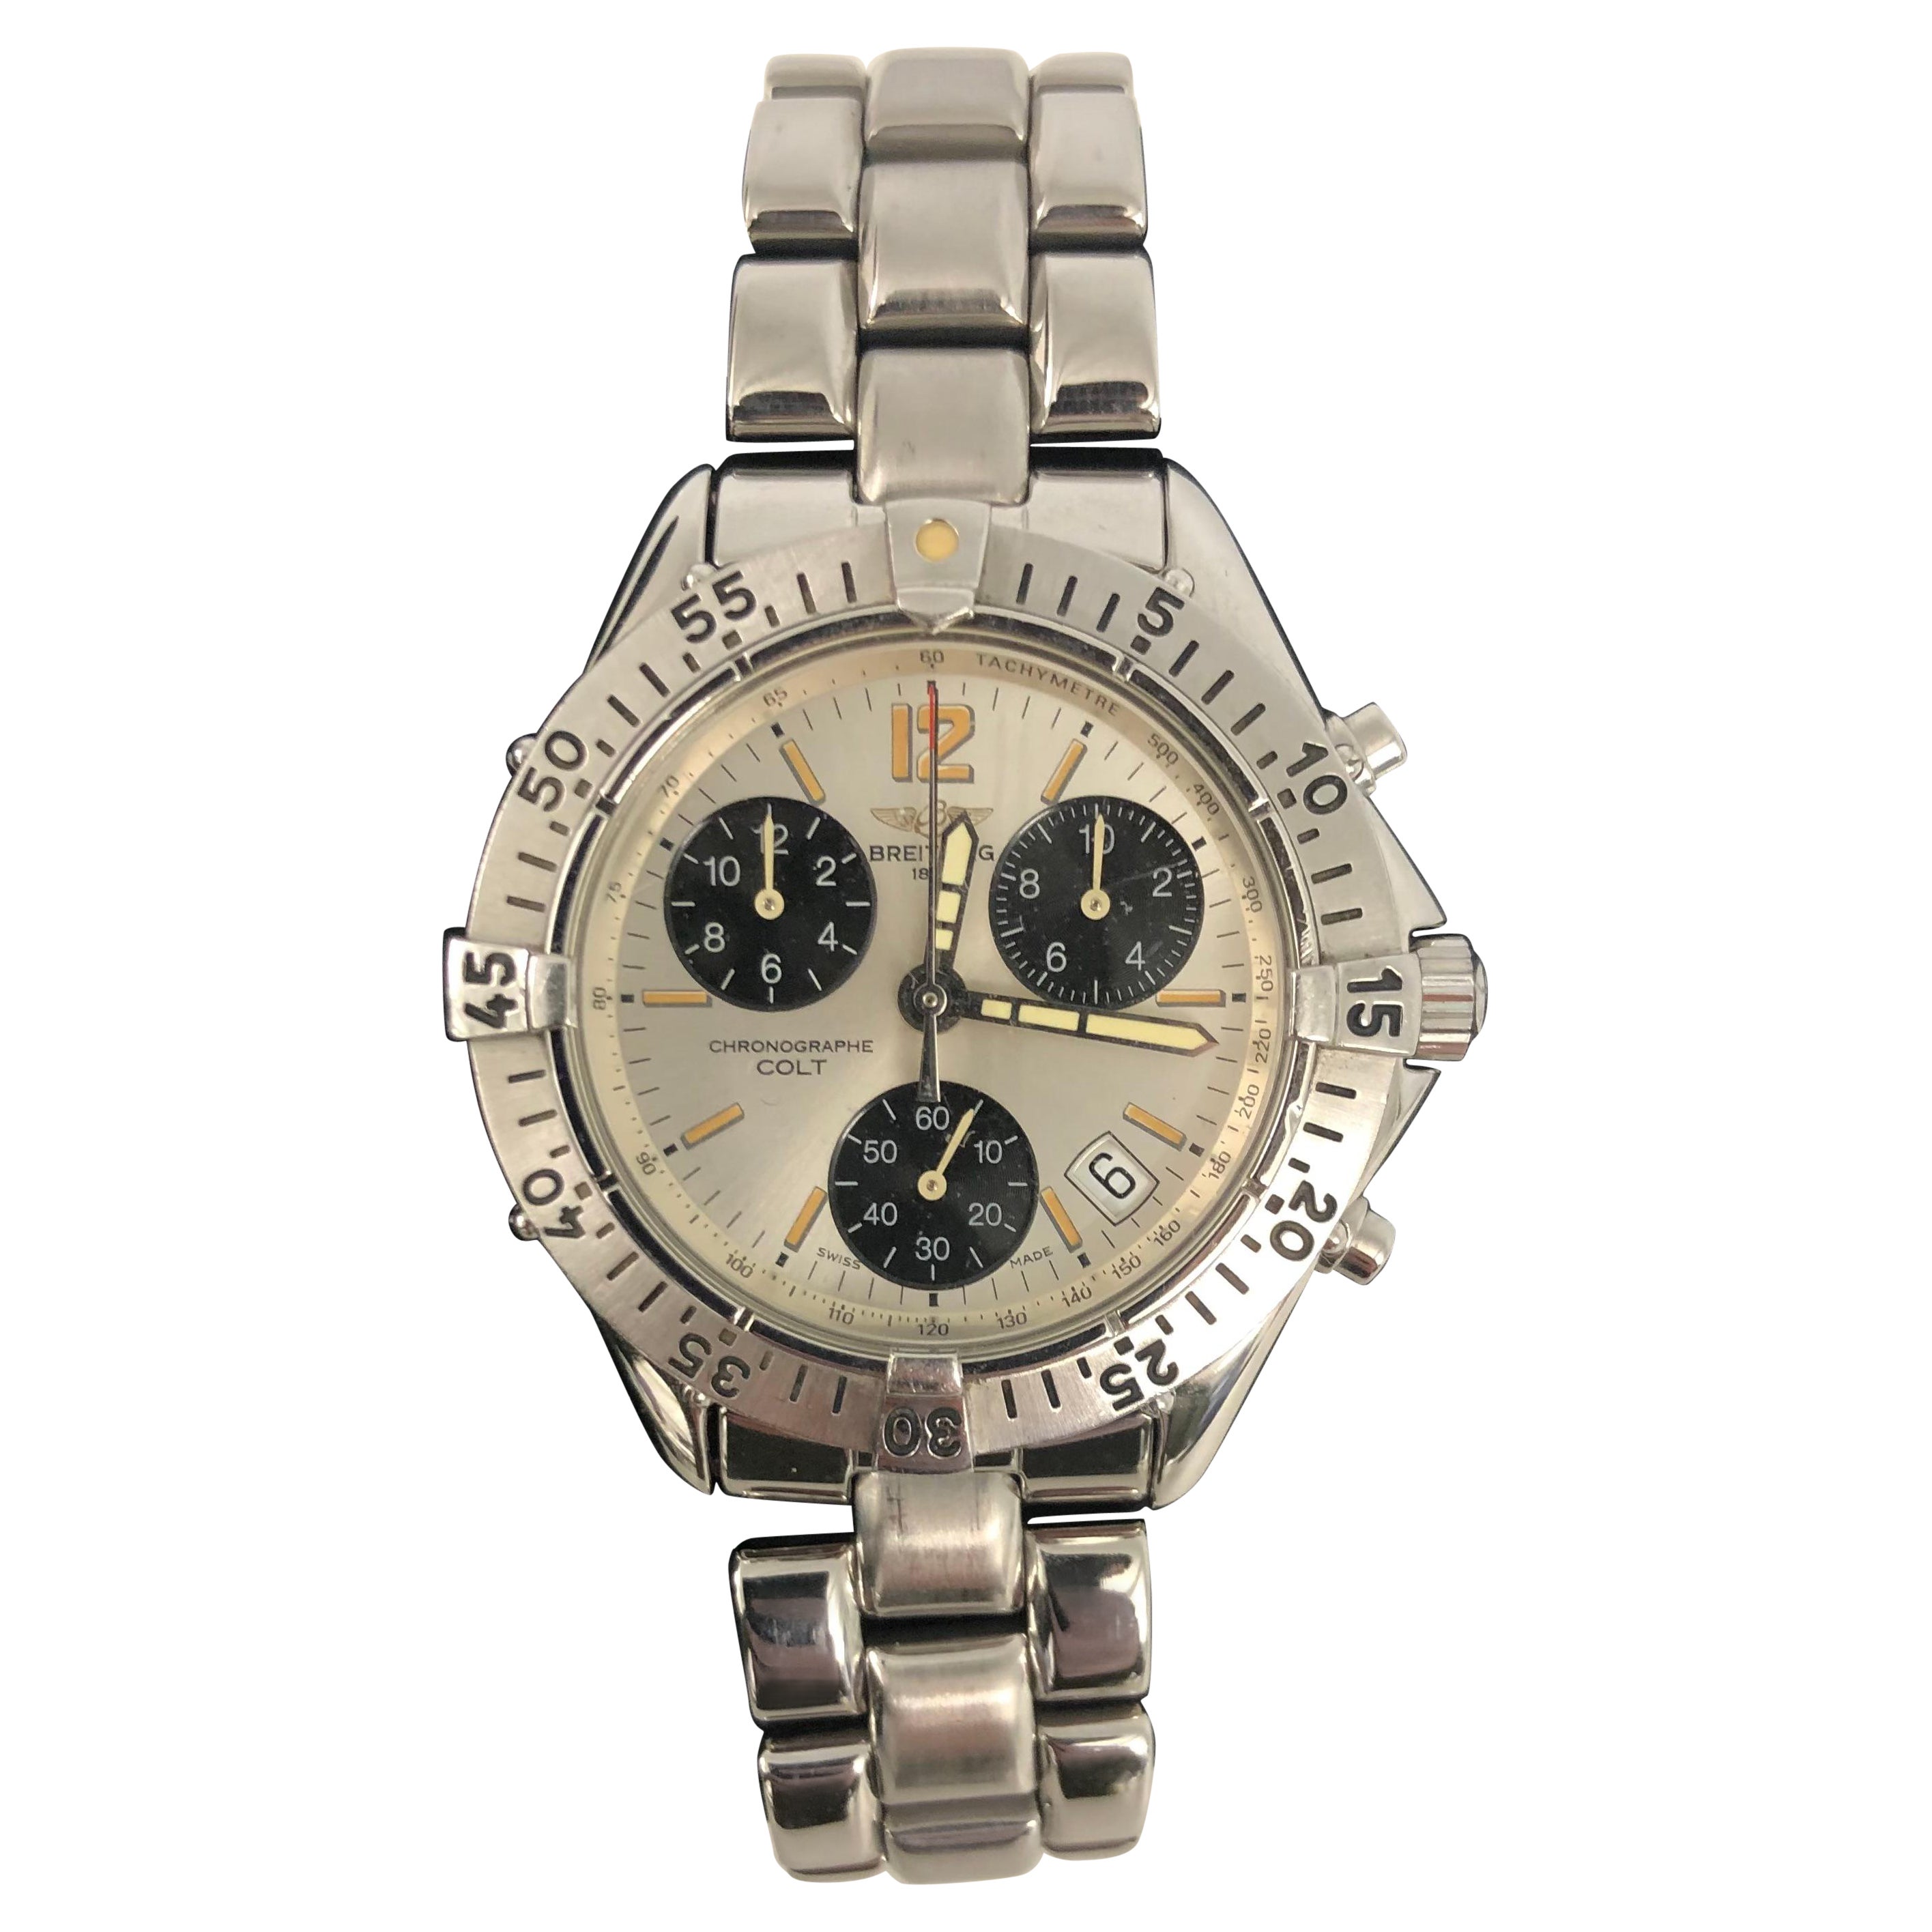 Breitling Men’s Colt Chronograph A53035 Stainless Steel Watch mm 